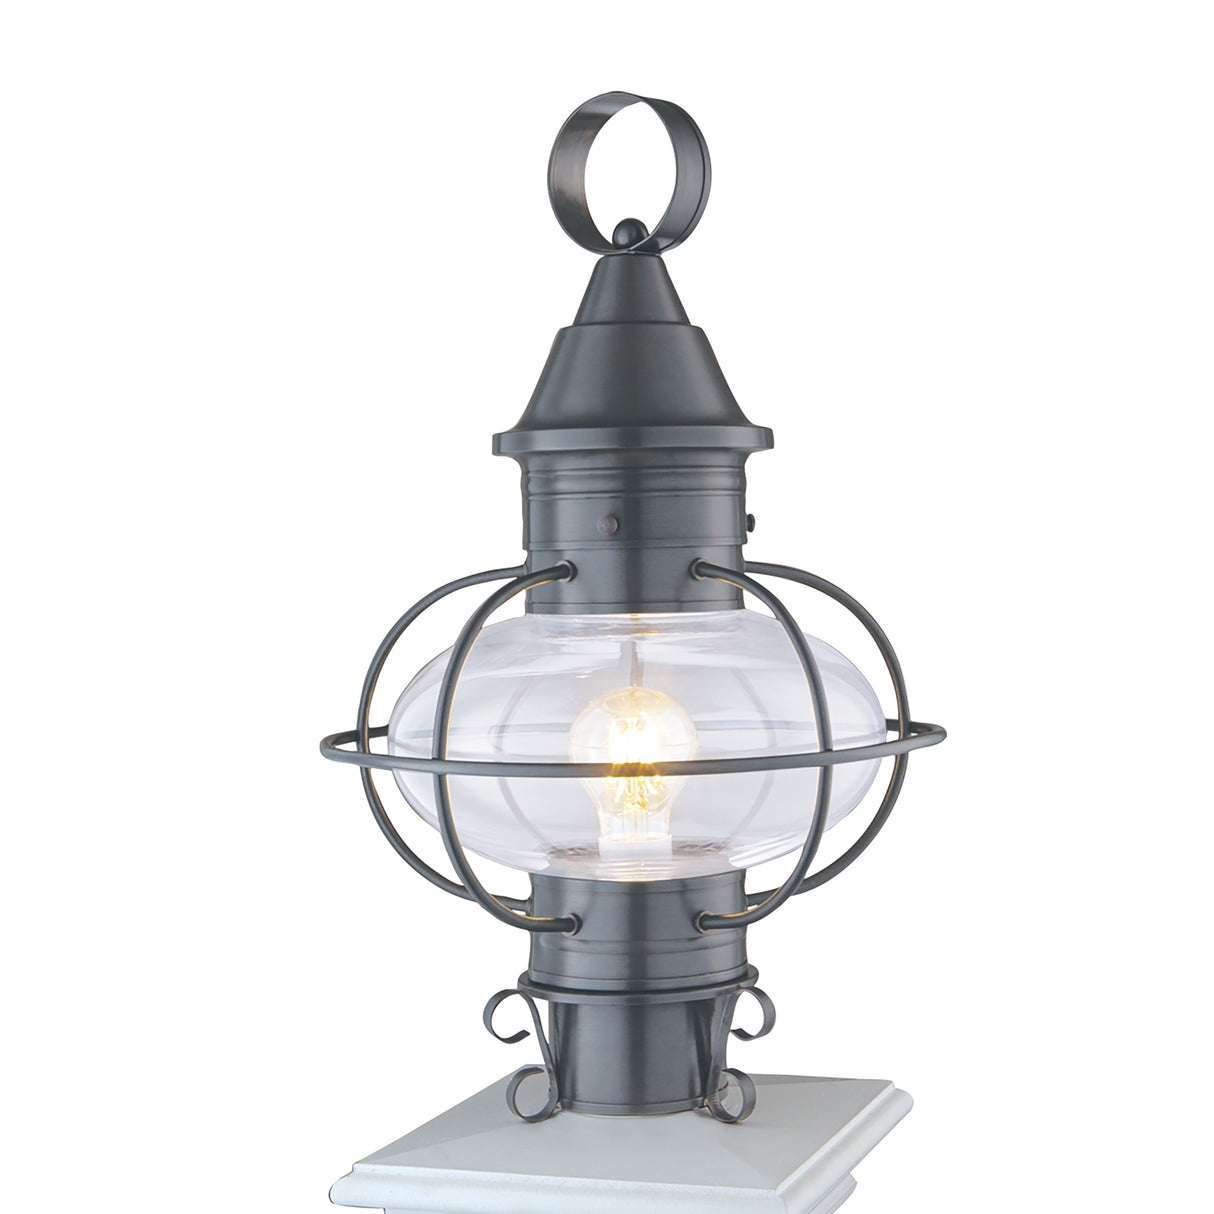 Elk 1611-GM-CL Classic Onion Outdoor Post Lantern - Gun Metal With Clear Glass